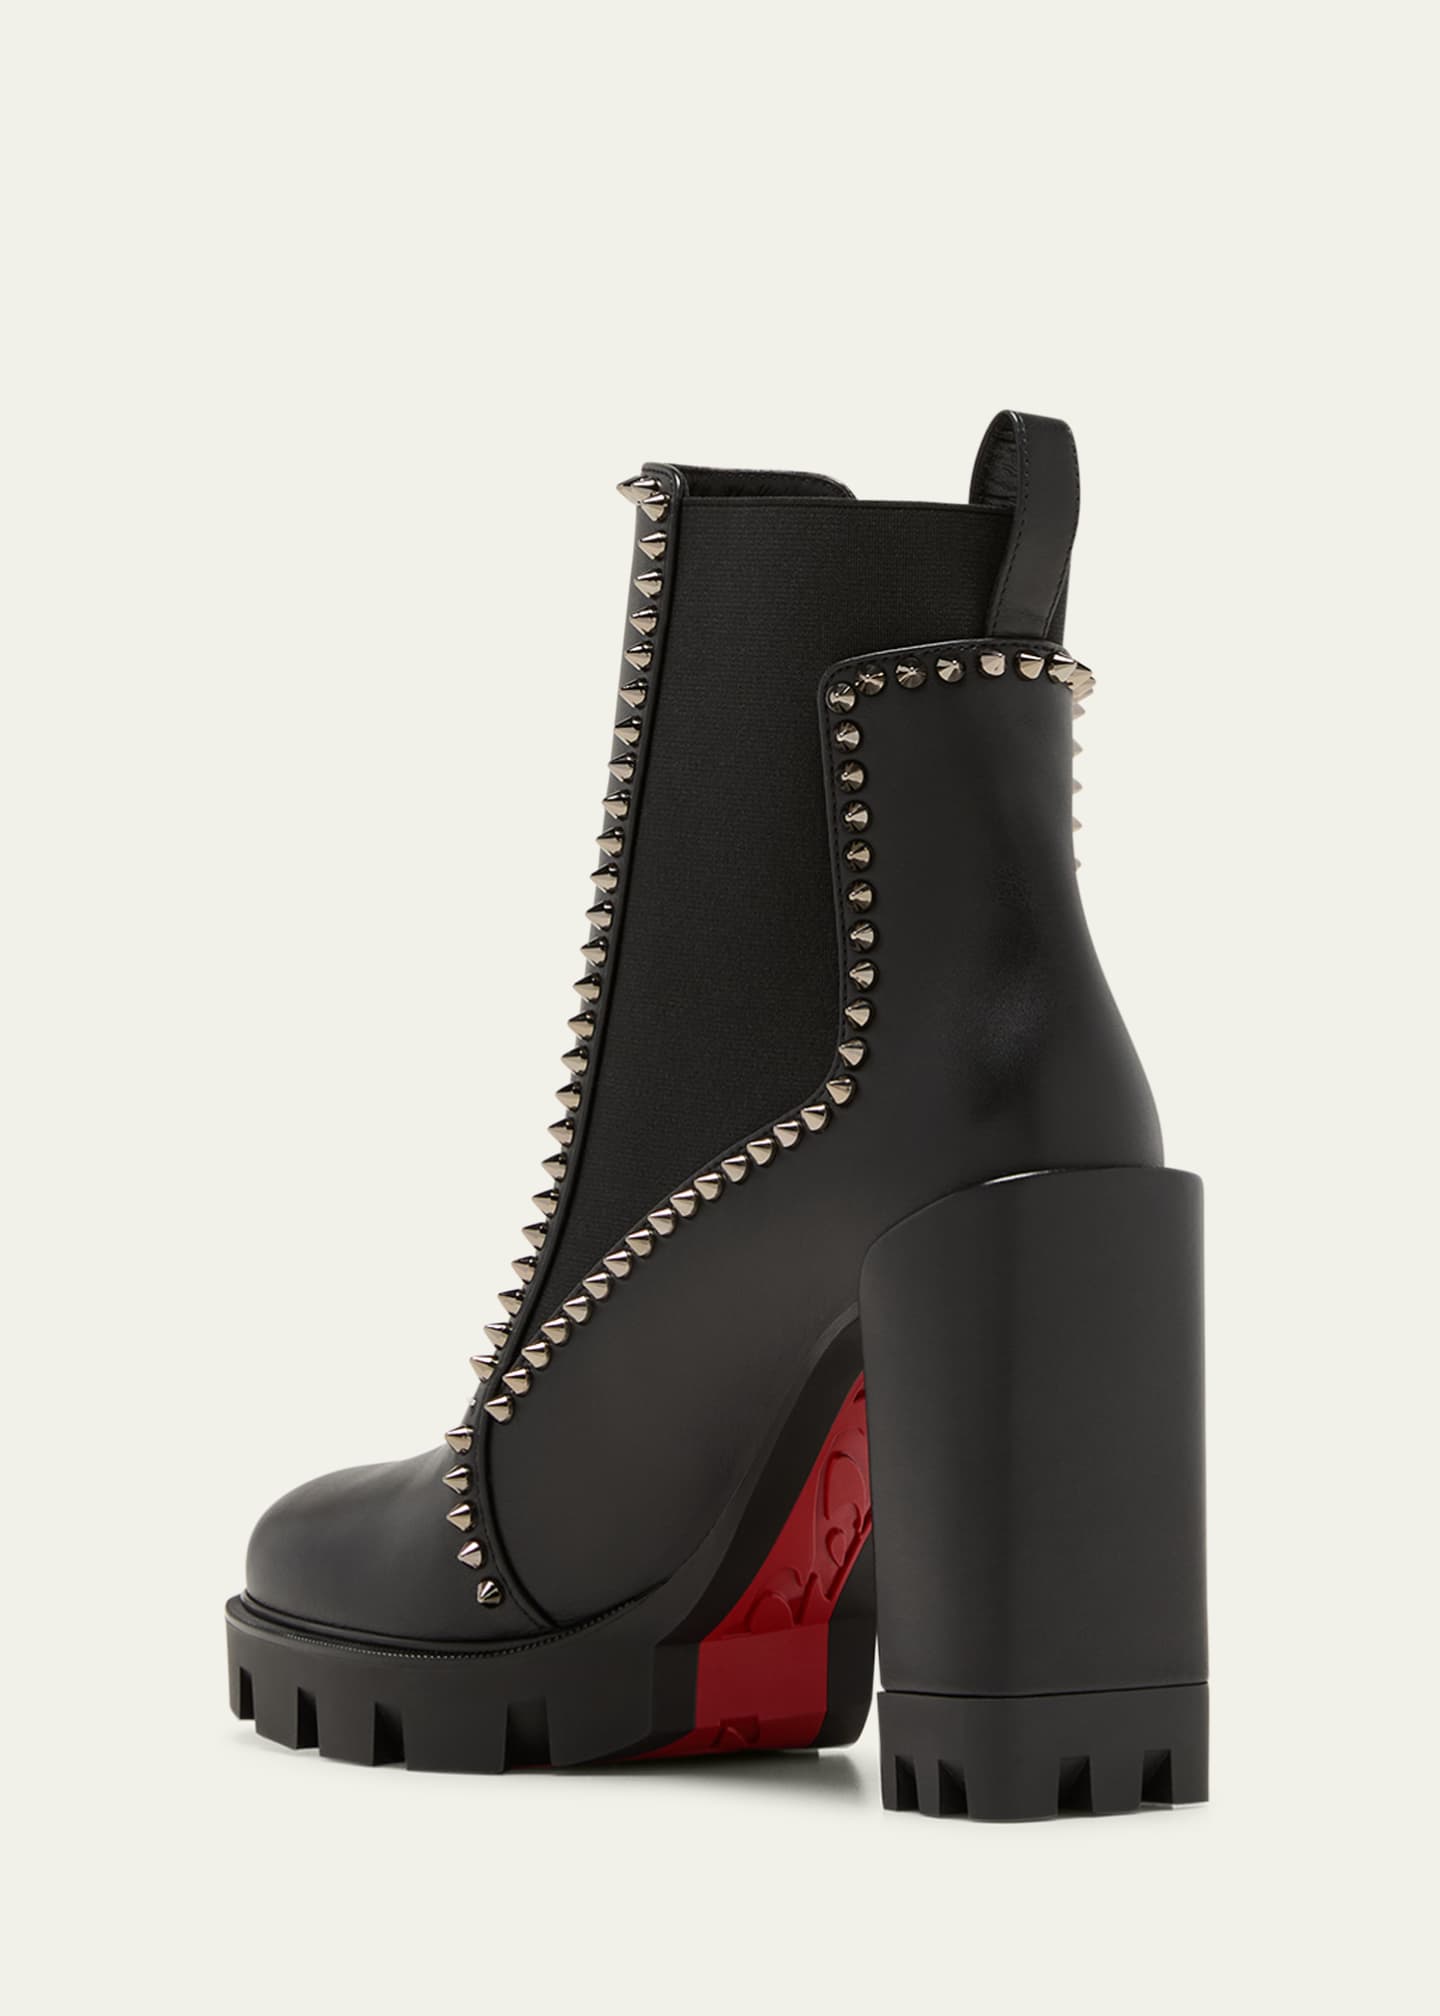 aldrig melodrama søn Christian Louboutin Spike Leather Chelsea Red Sole Booties - Bergdorf  Goodman